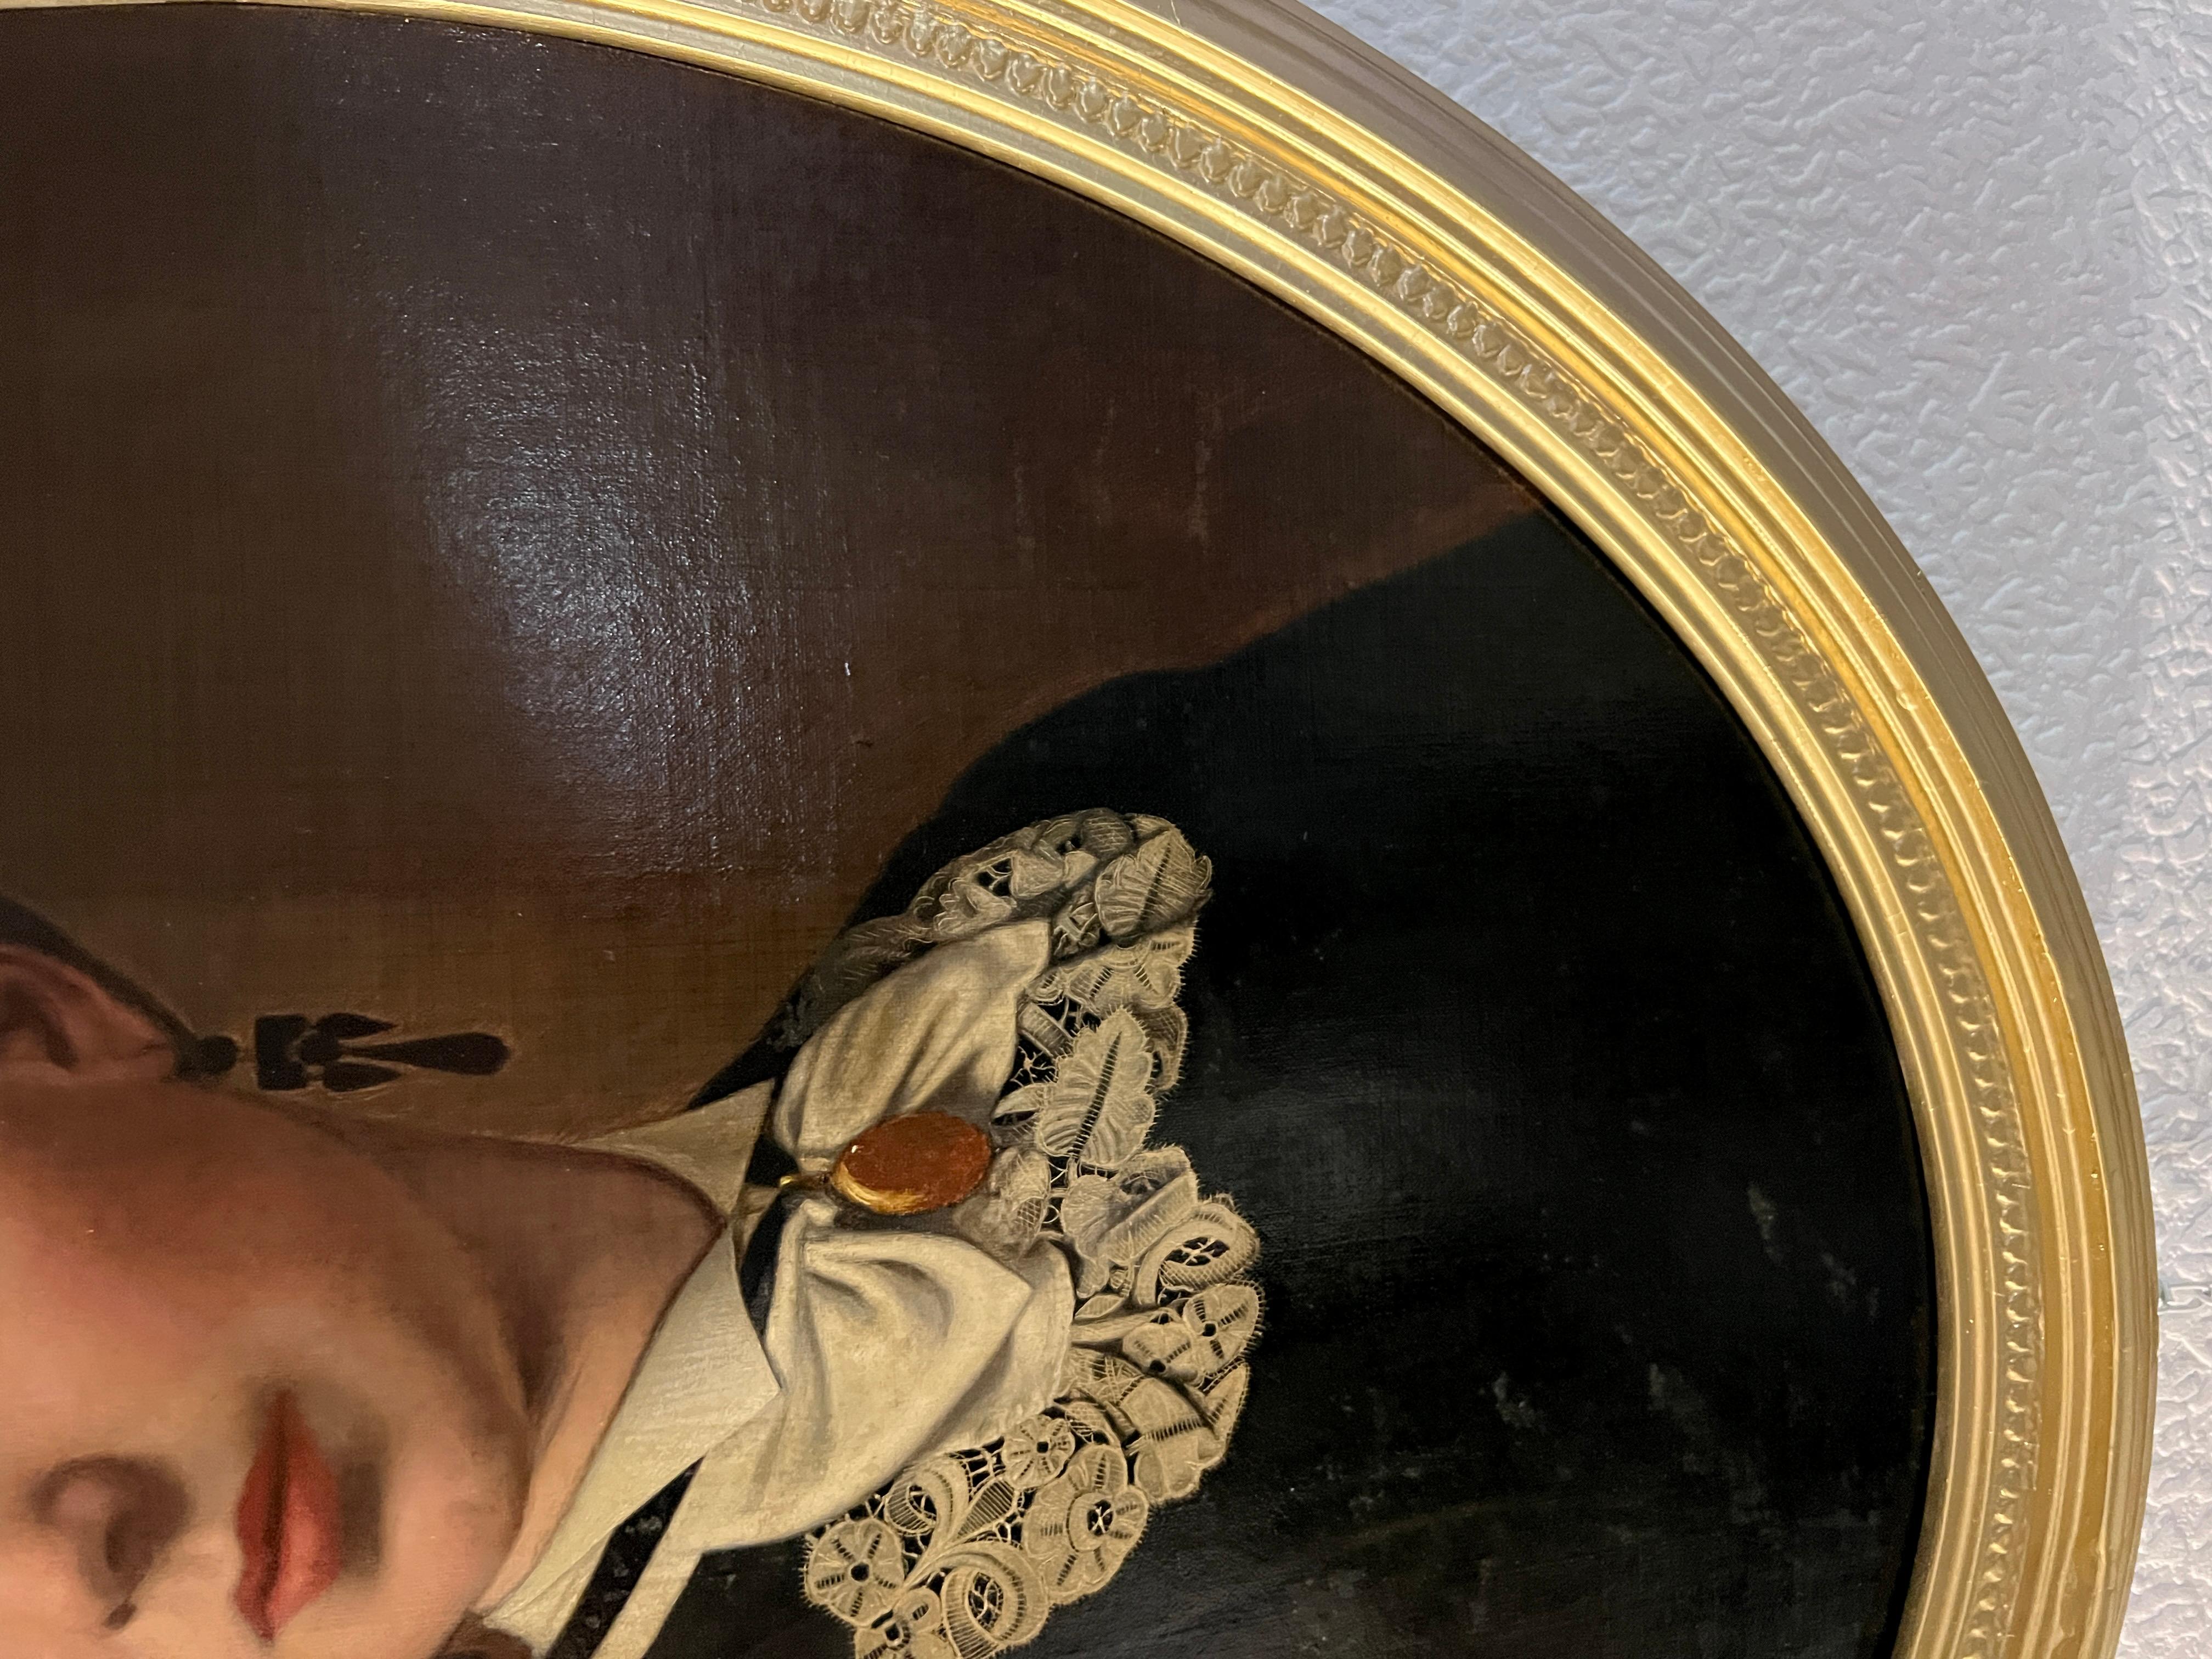 Up for sale is a beautiful Antique 19-century  original oil painting on canvas depicting a female portrait . 

This painting is a classic portrait of a woman, set within an oval frame. The woman is portrayed with a direct and confident gaze,